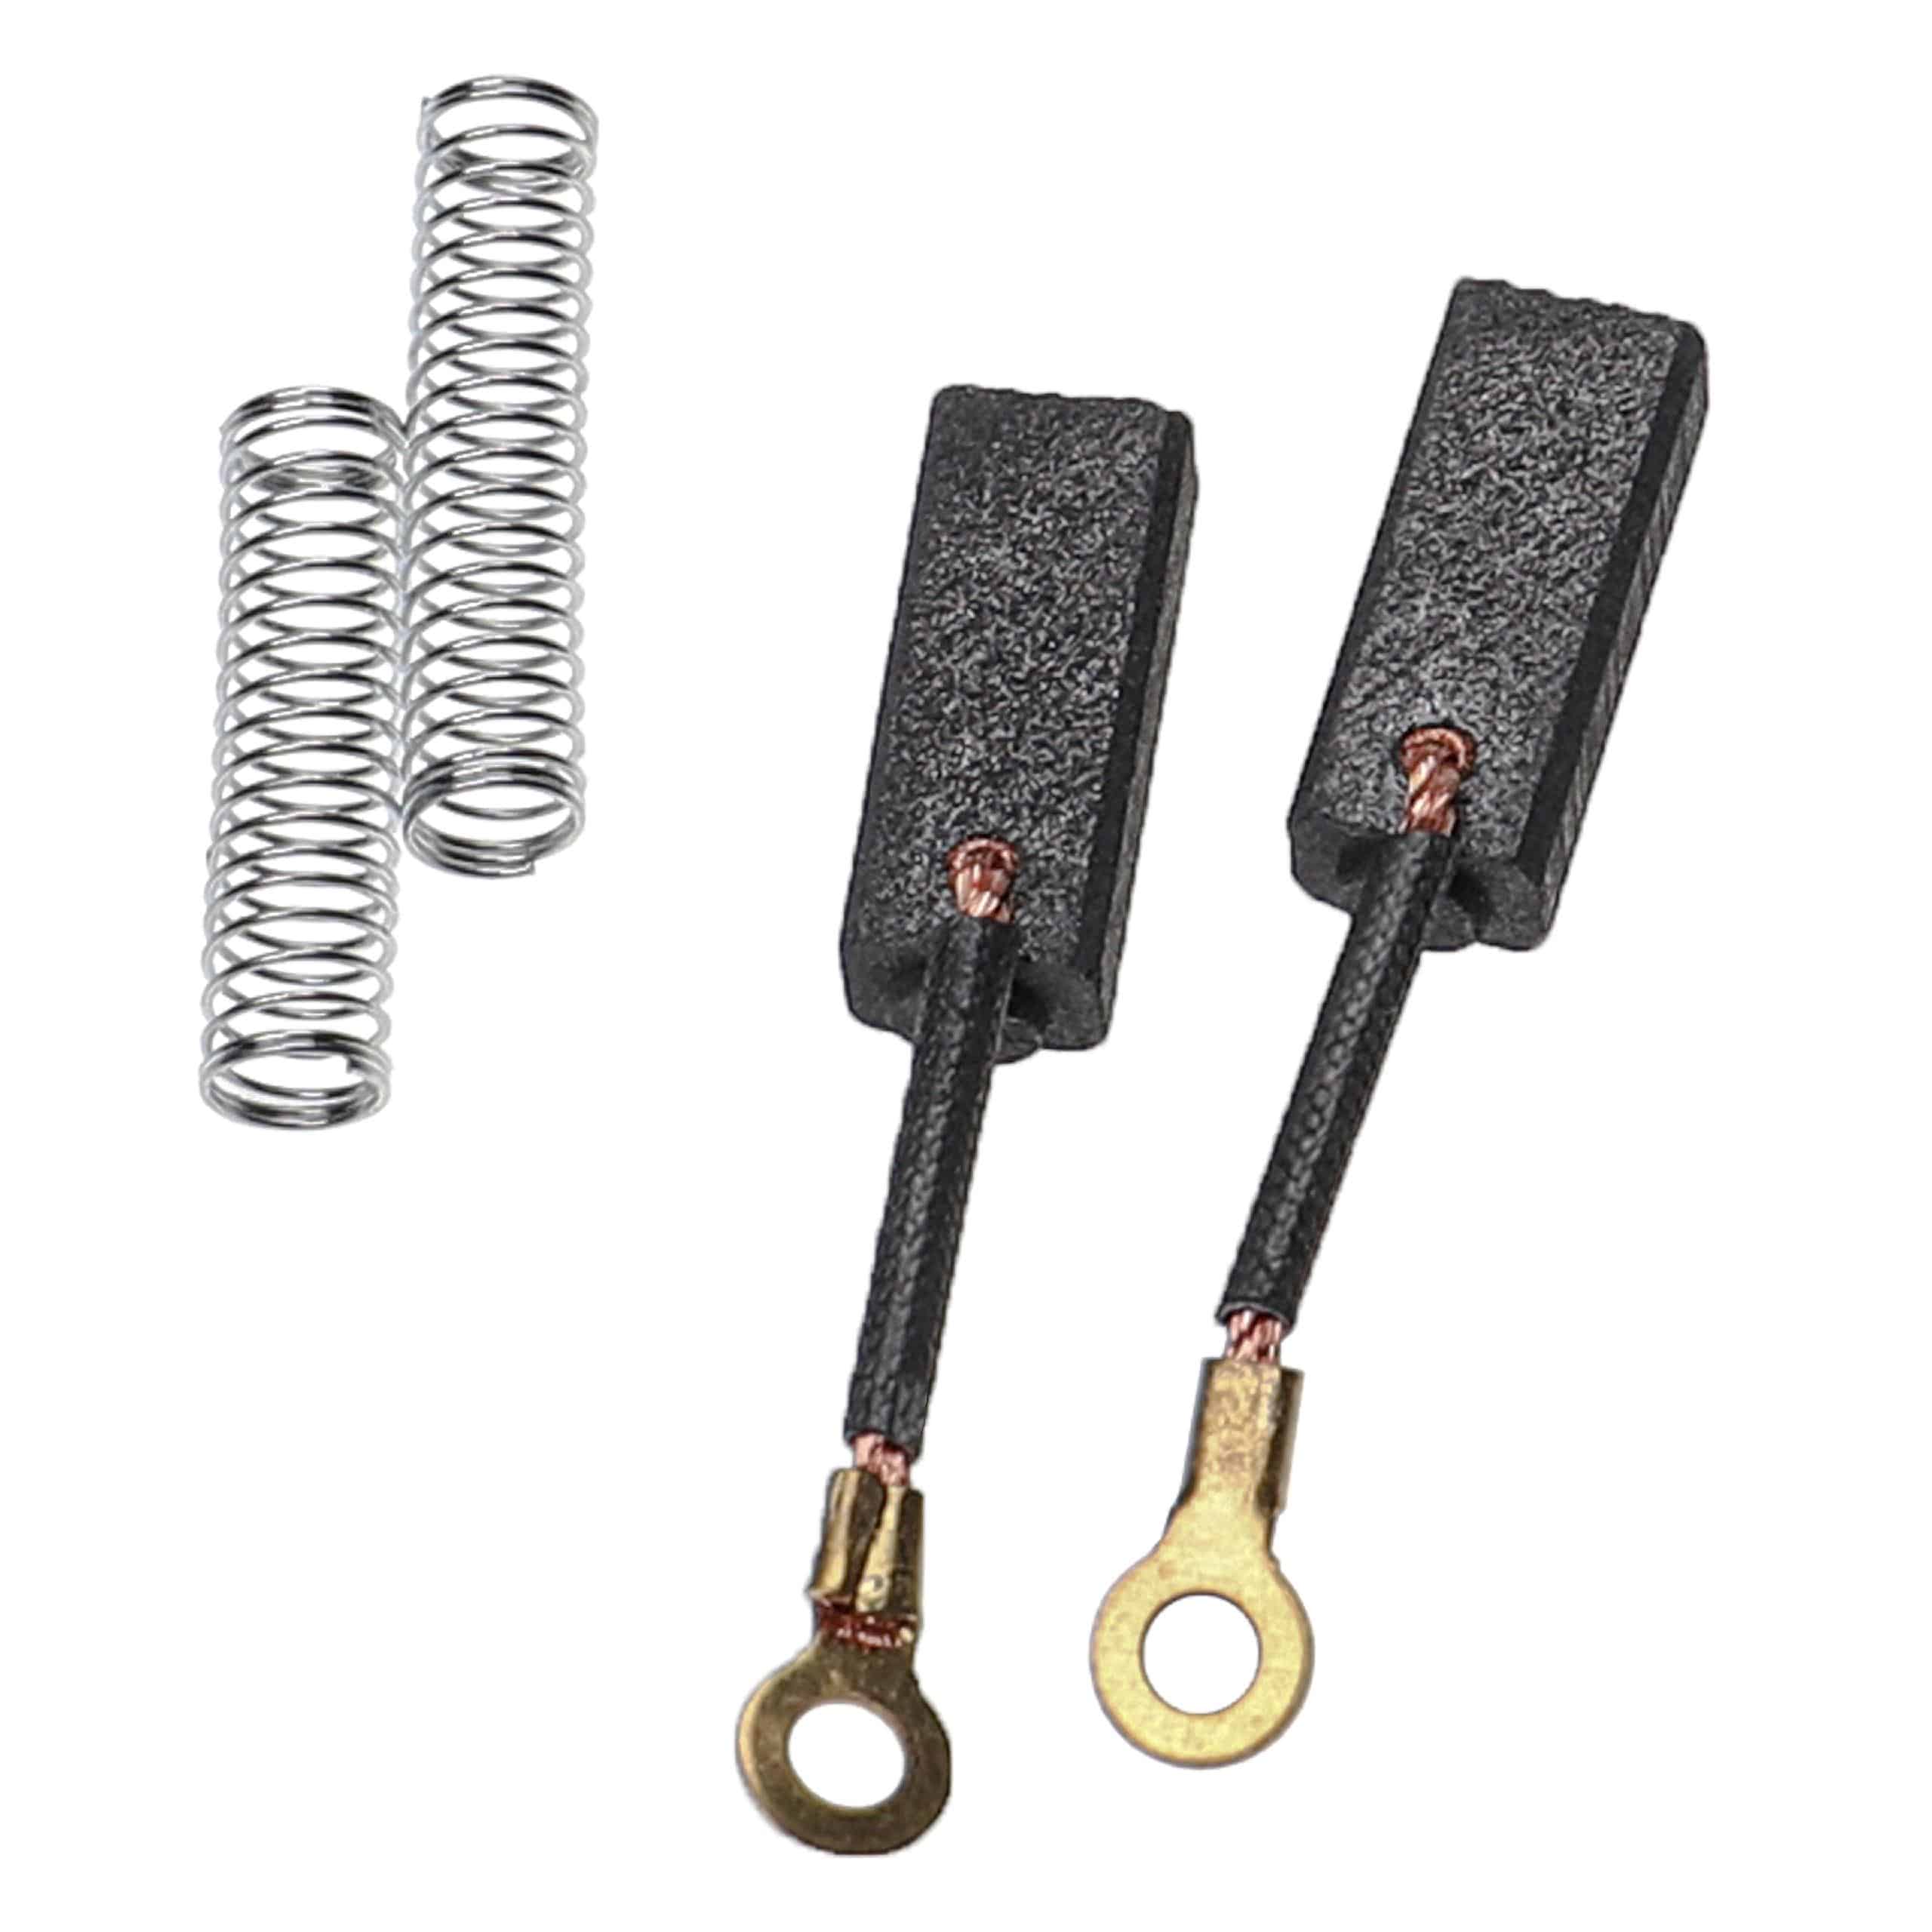 2x Carbon Brush as Replacement for MZ 0816.1-202 Electric Power Tools + Spring, 6 x 8 x 20mm